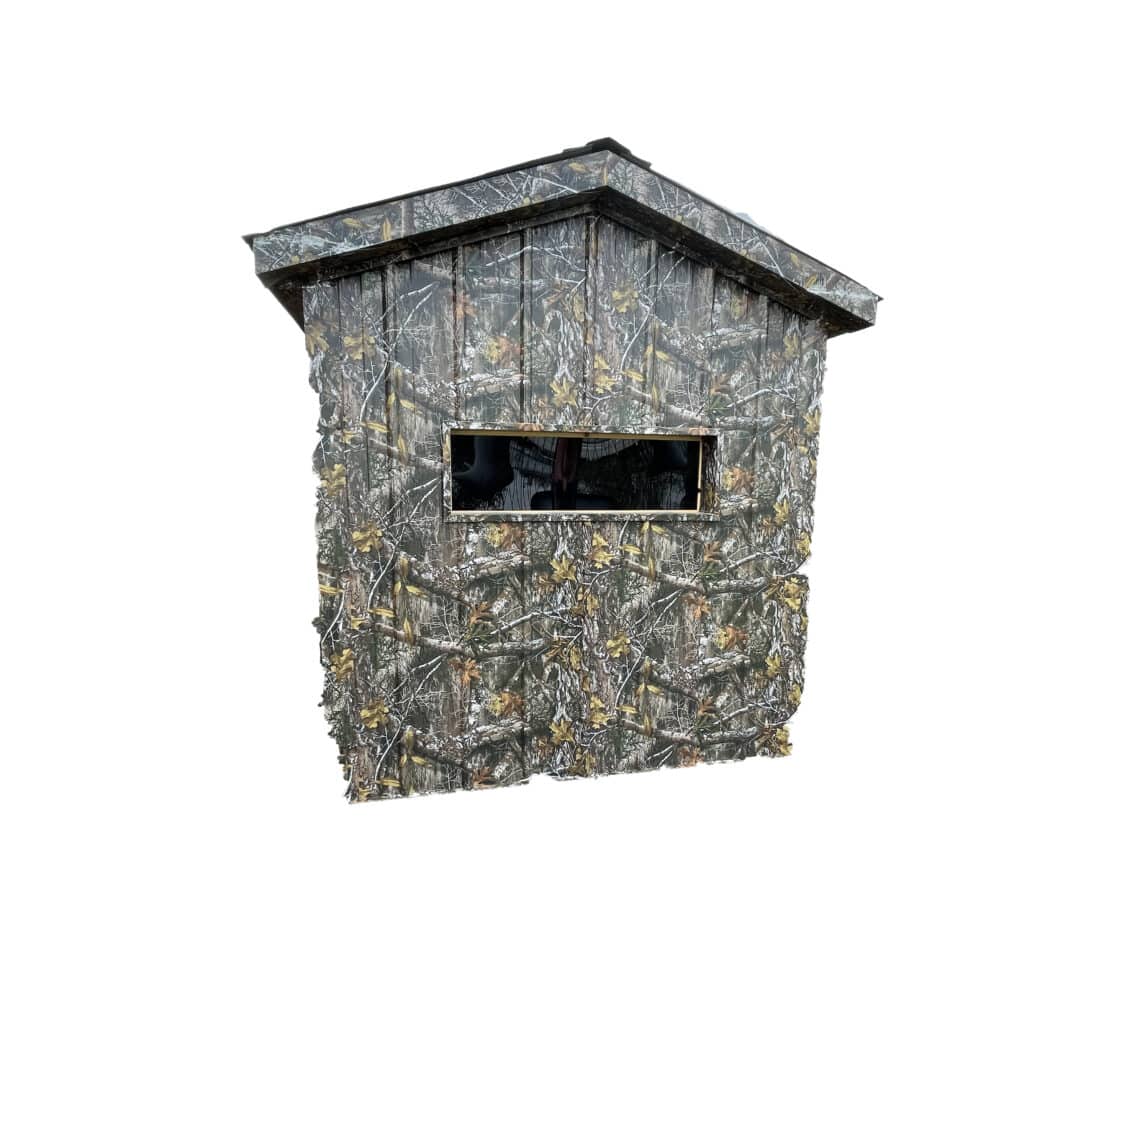 Octagon blind hunting blinds stand point deer amish optional built 2075 condo